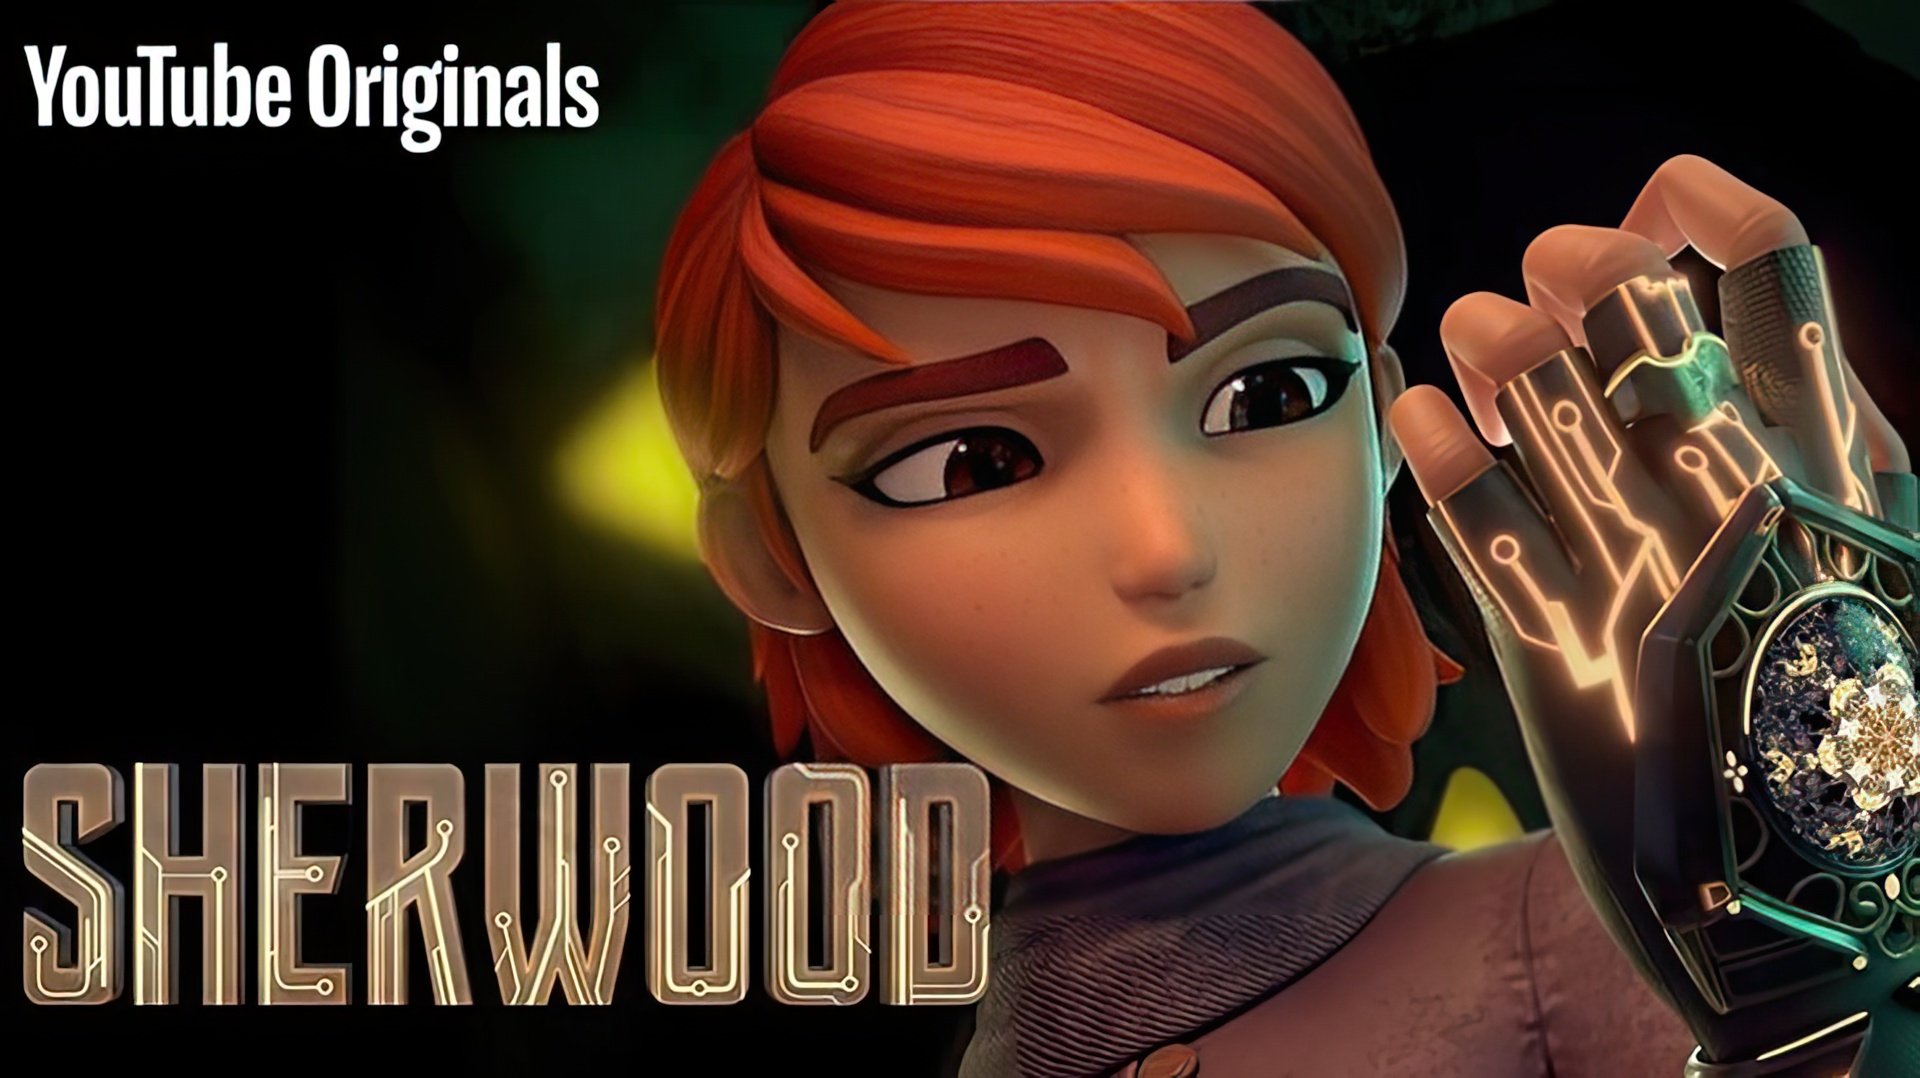 In 2019, Anya Chalotra voiced Robin Loxley from the animated series 'Sherwood'